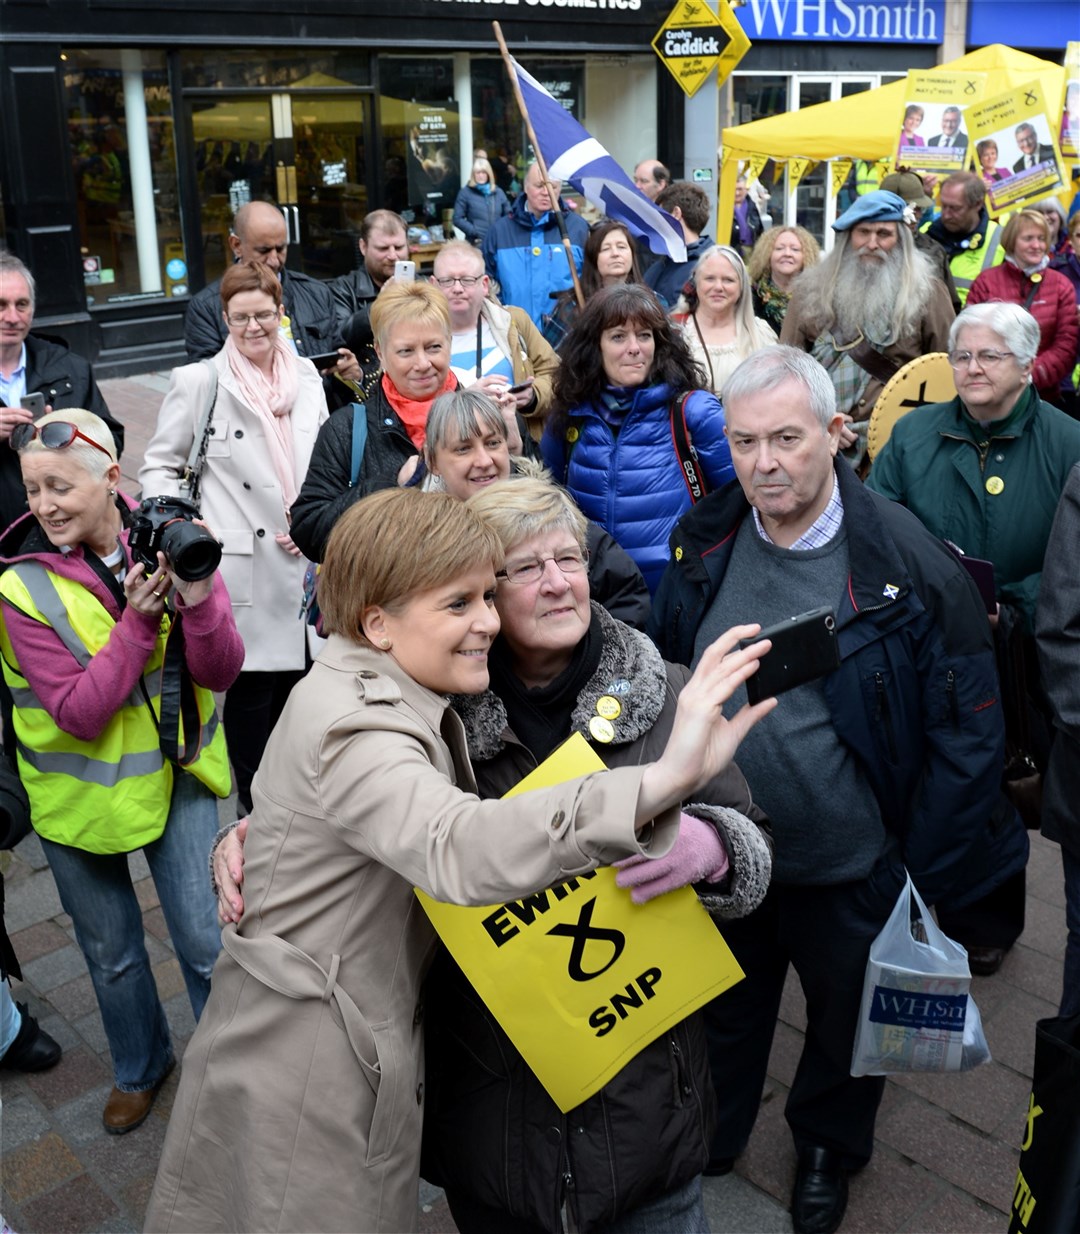 NFirst Minister Nicola Sturgeon on visit to Inverness.Selfies on the High Street.Picture: Gary Anthony. Image No.033268.